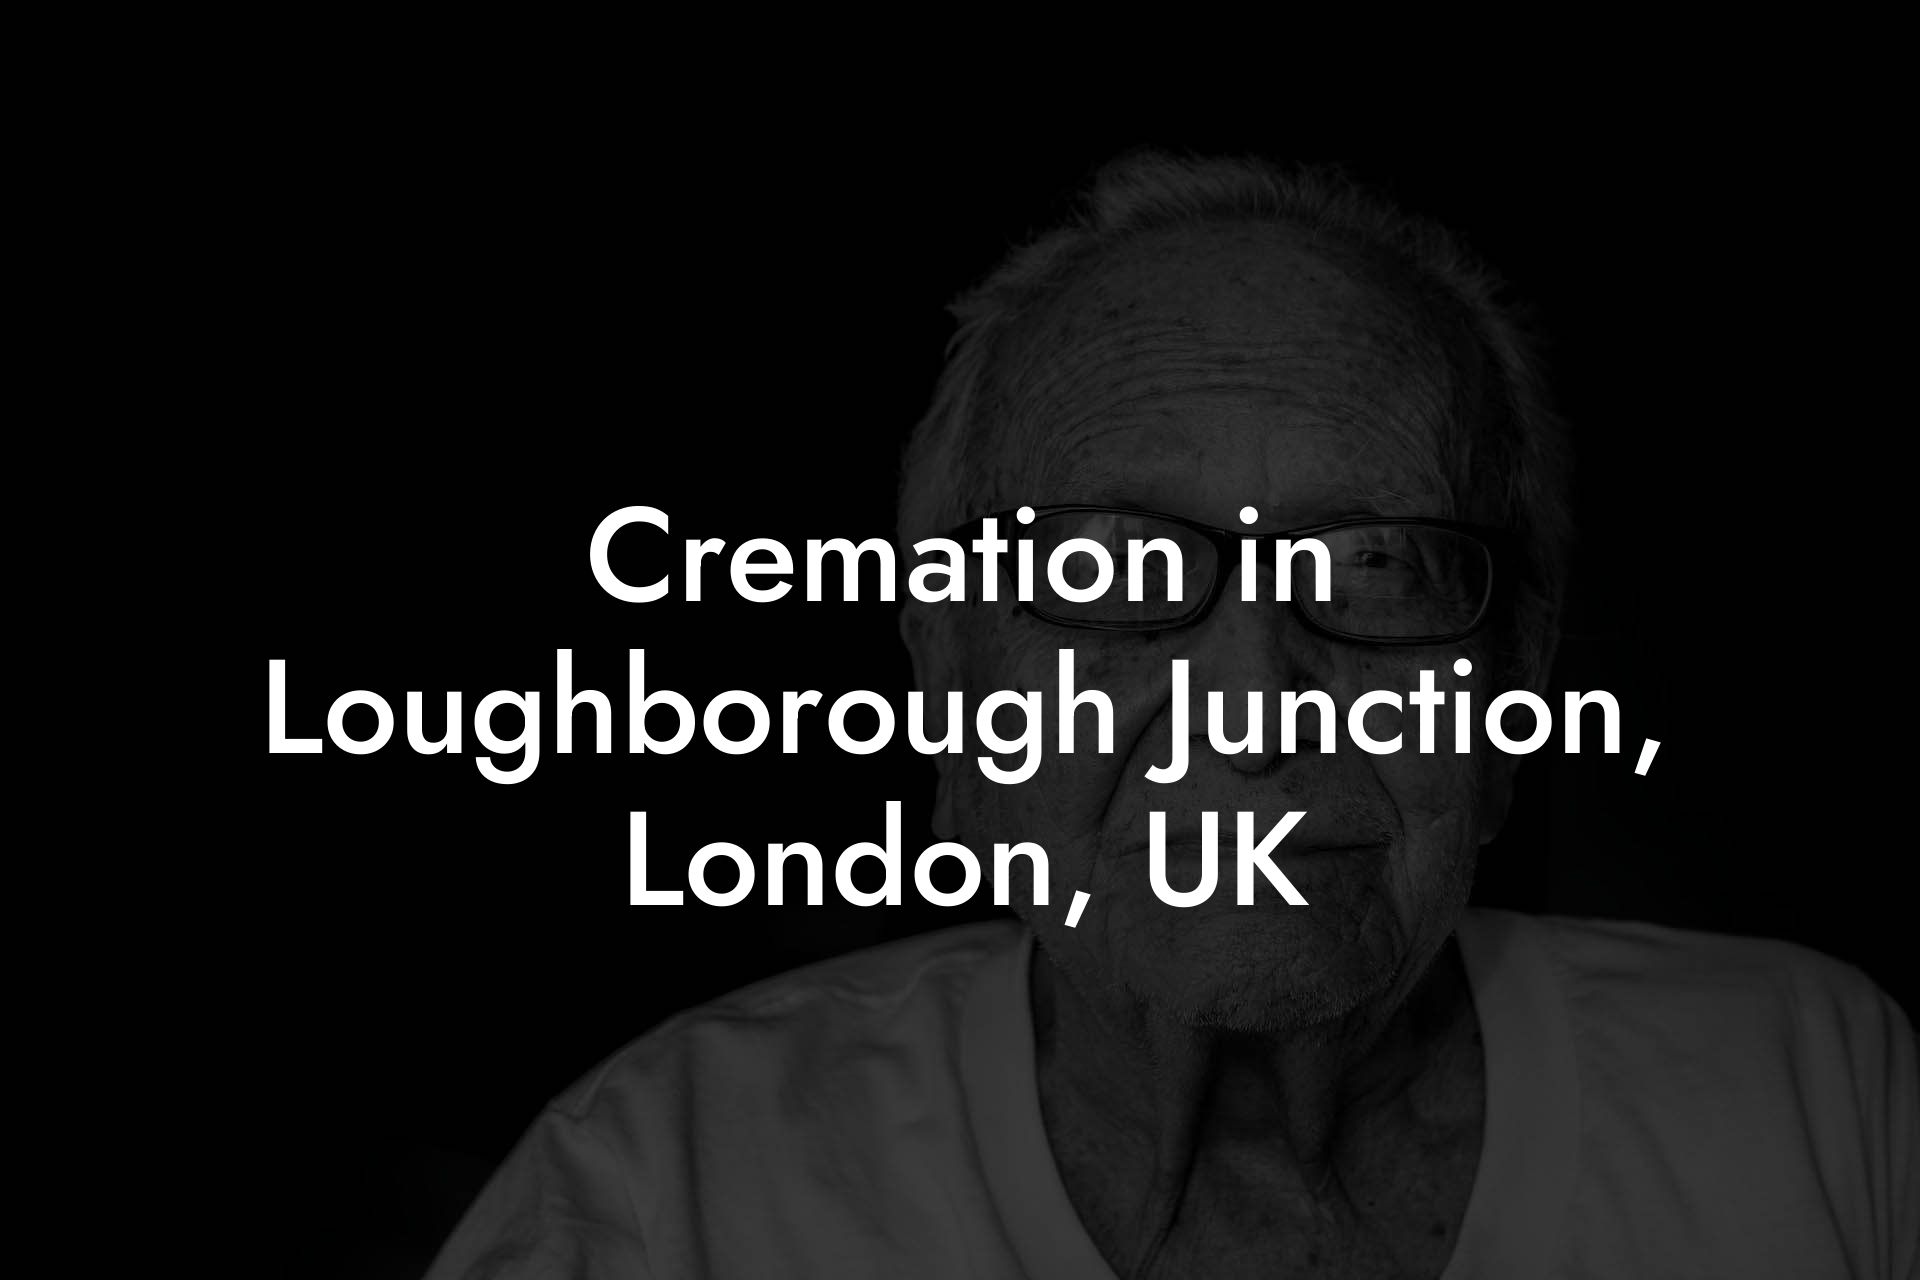 Cremation in Loughborough Junction, London, UK